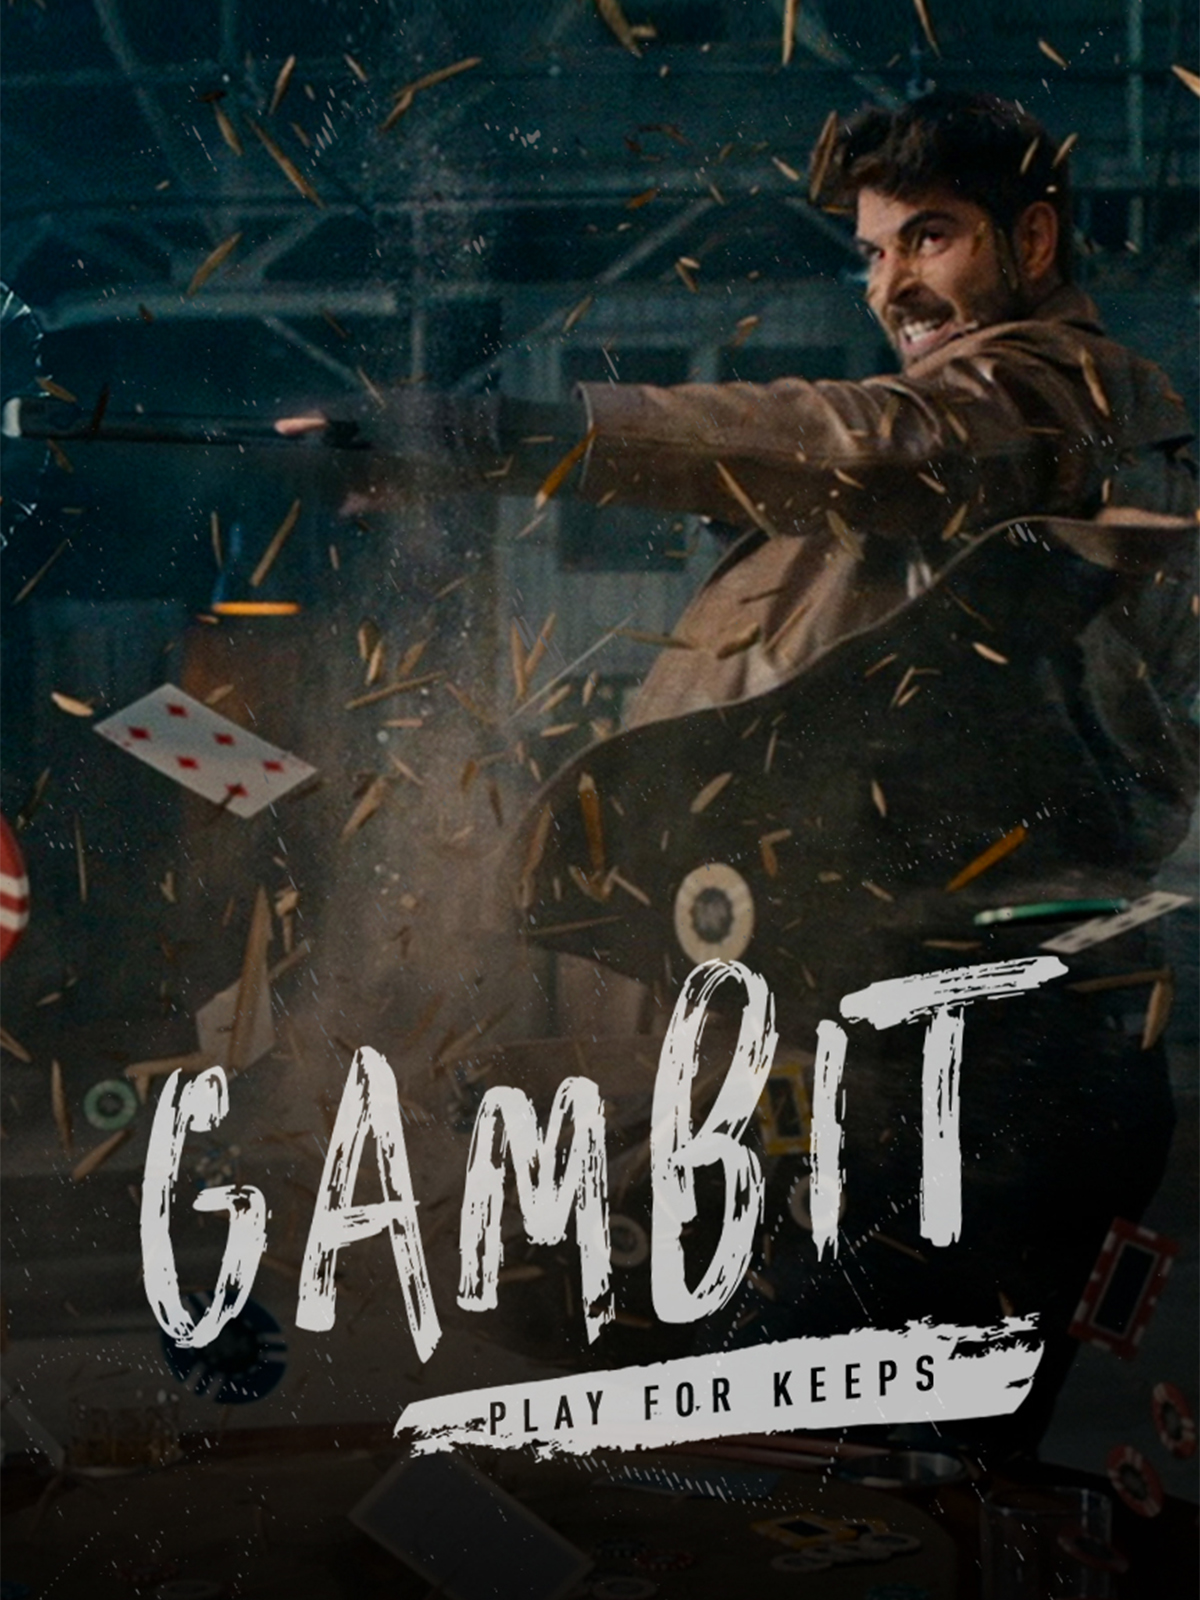 Gambit: Playing for Keeps